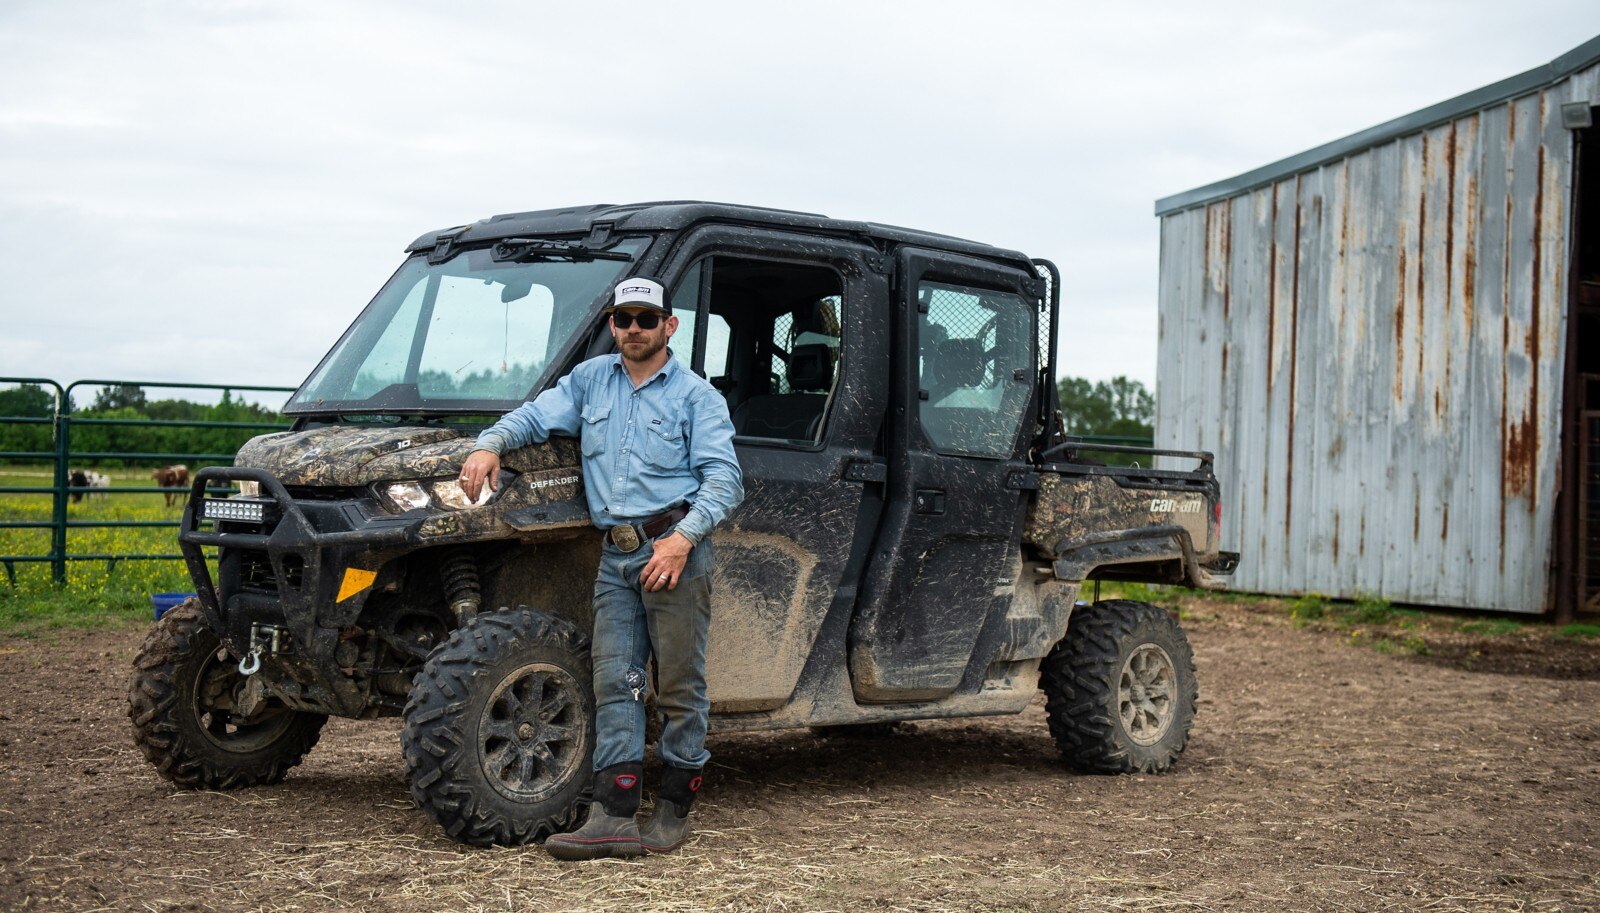 Chase Outlaw leaning against his Defender parked in front of a pasture and farm building.